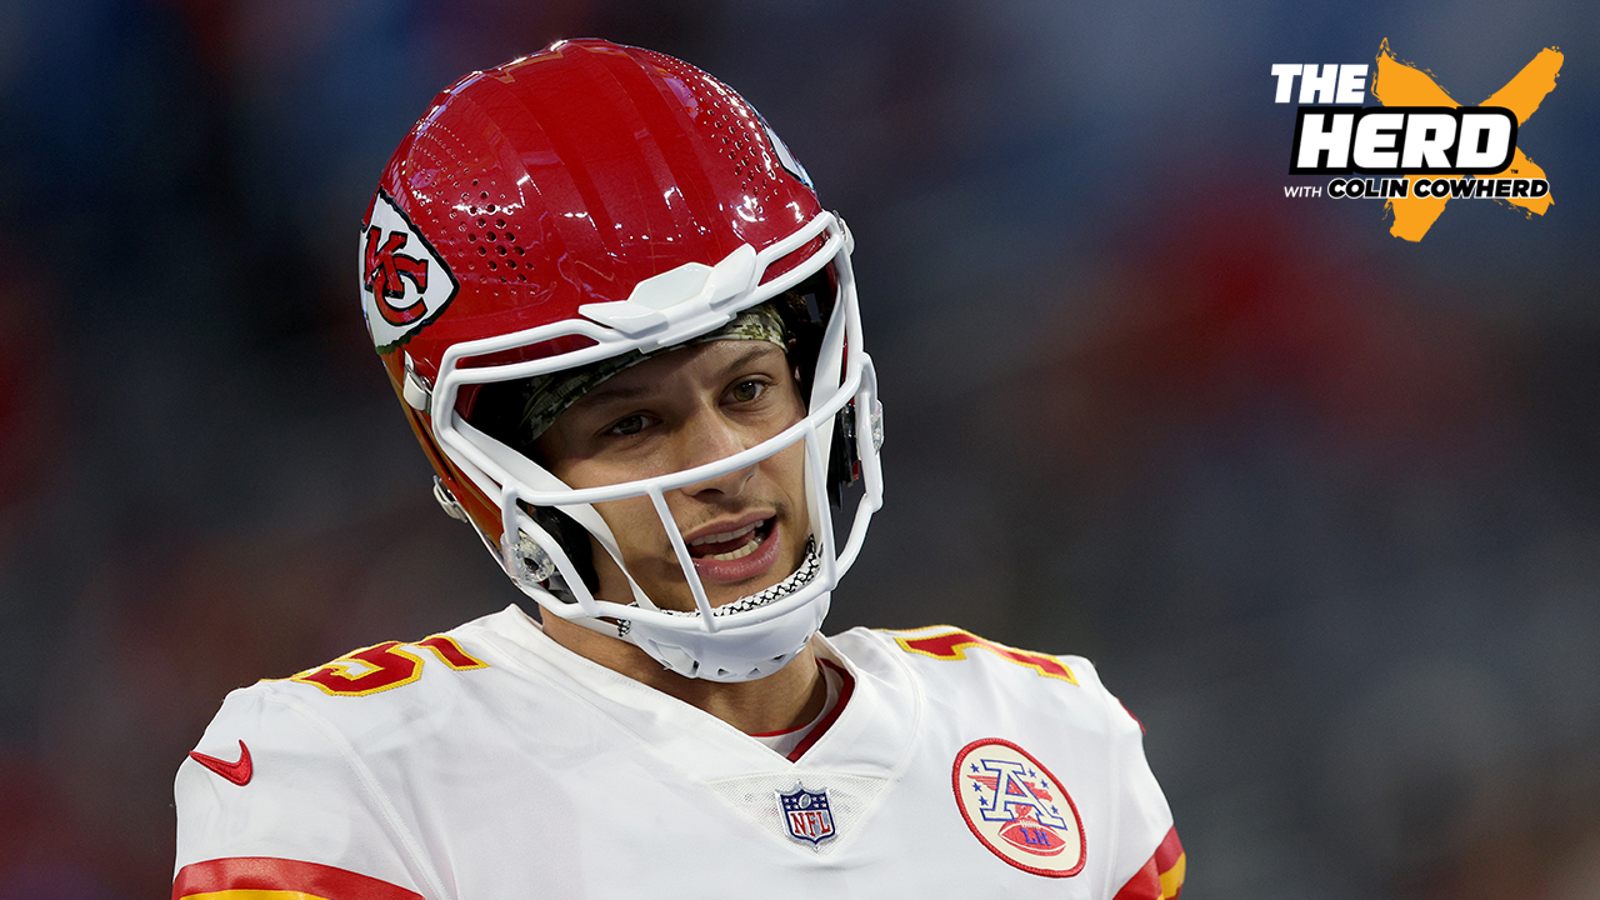 Are Chiefs the NFL's best?